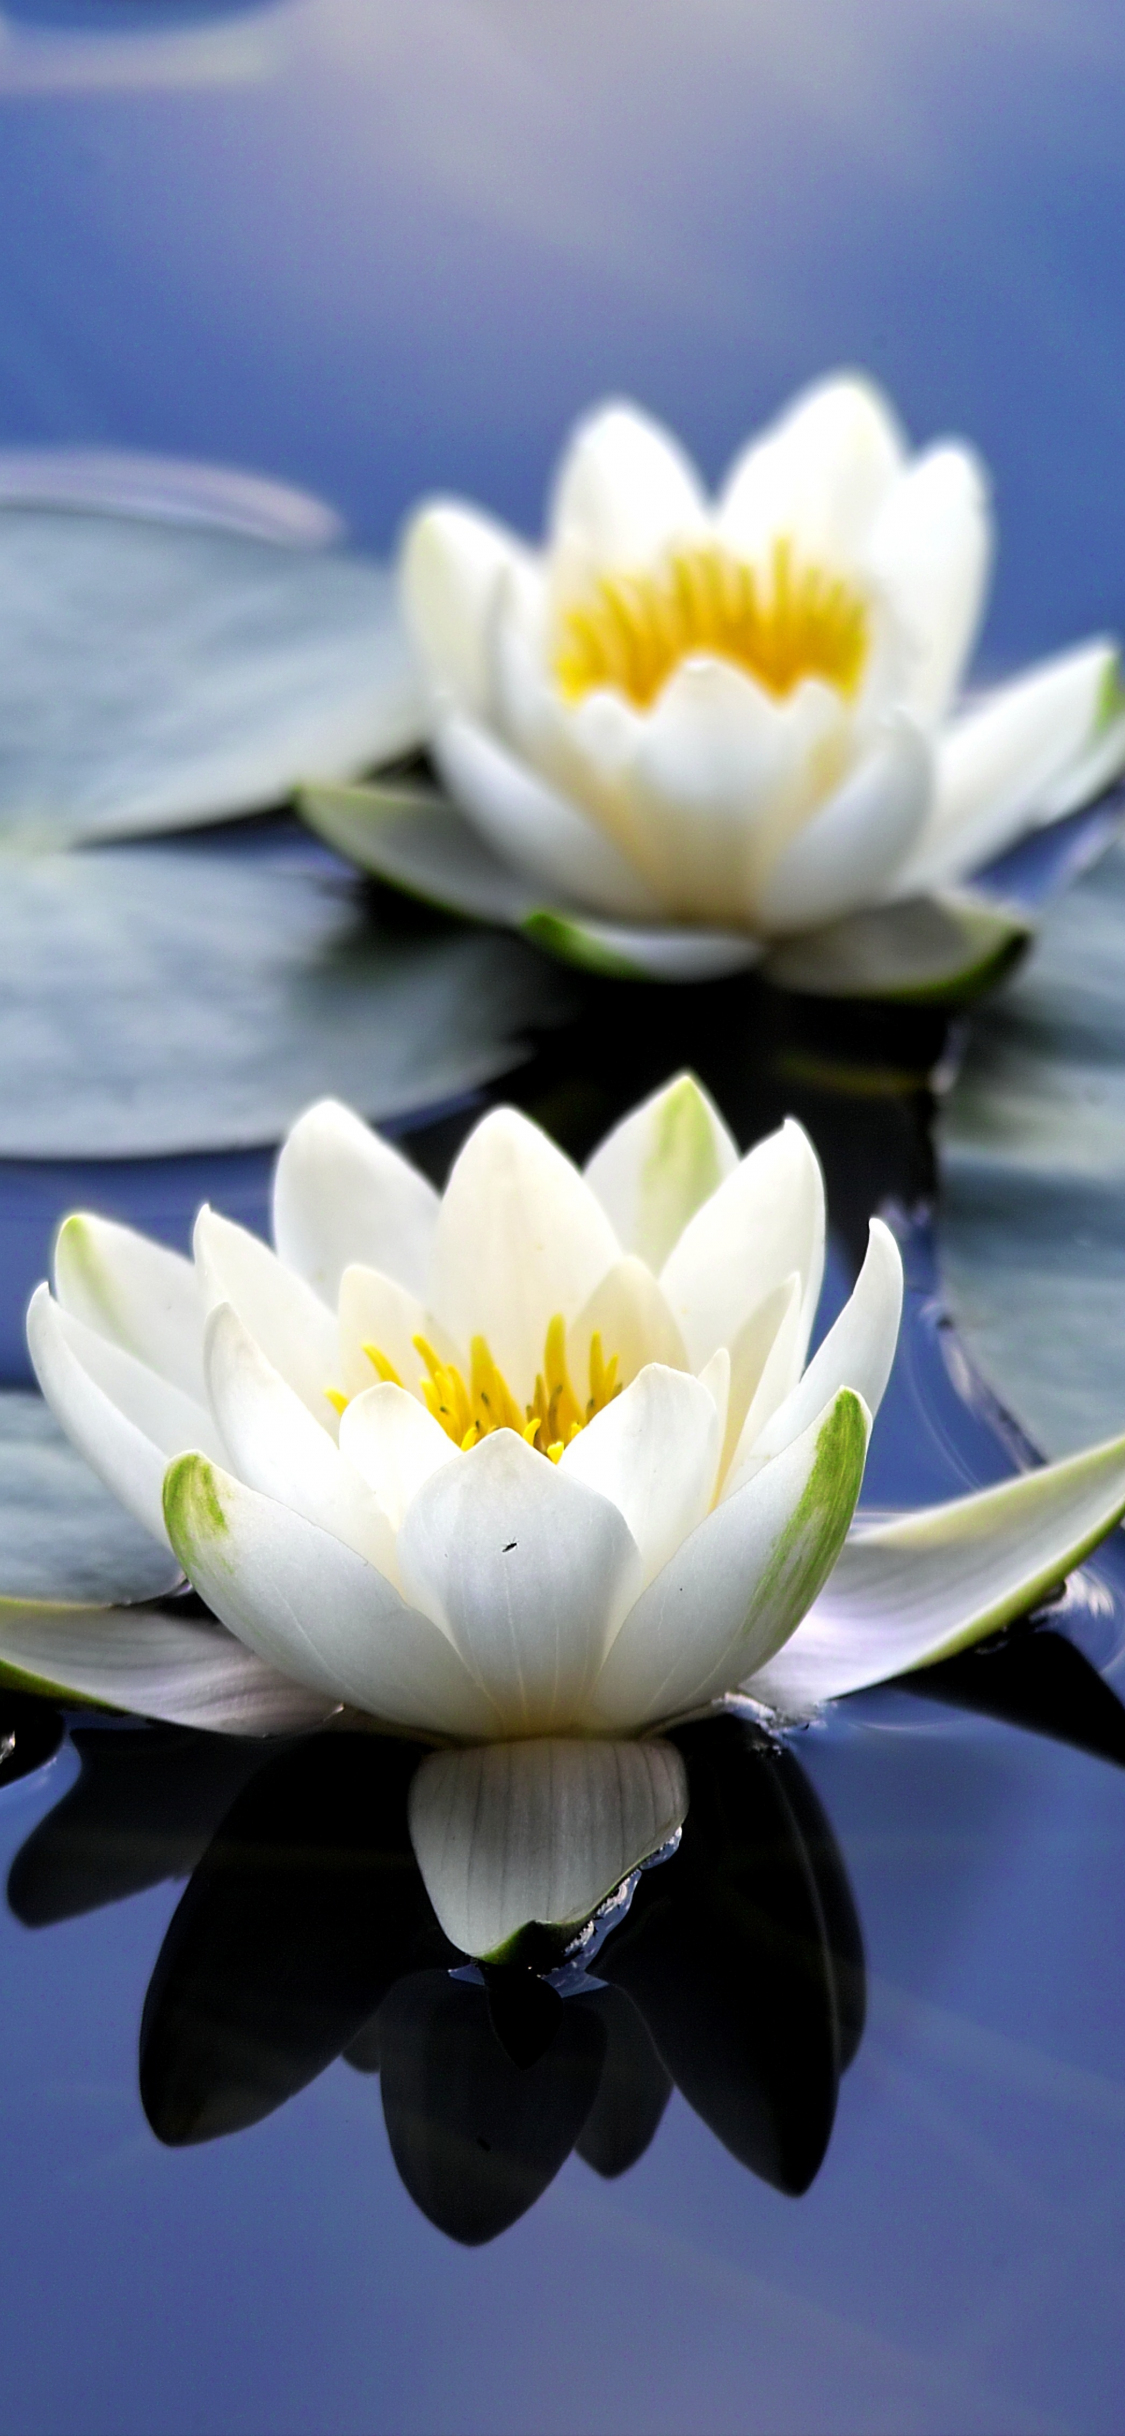 1125x2436 Download flora, white flowers, close up, bloom, water lily wallpaper, iphone x, hd image, background, 19022